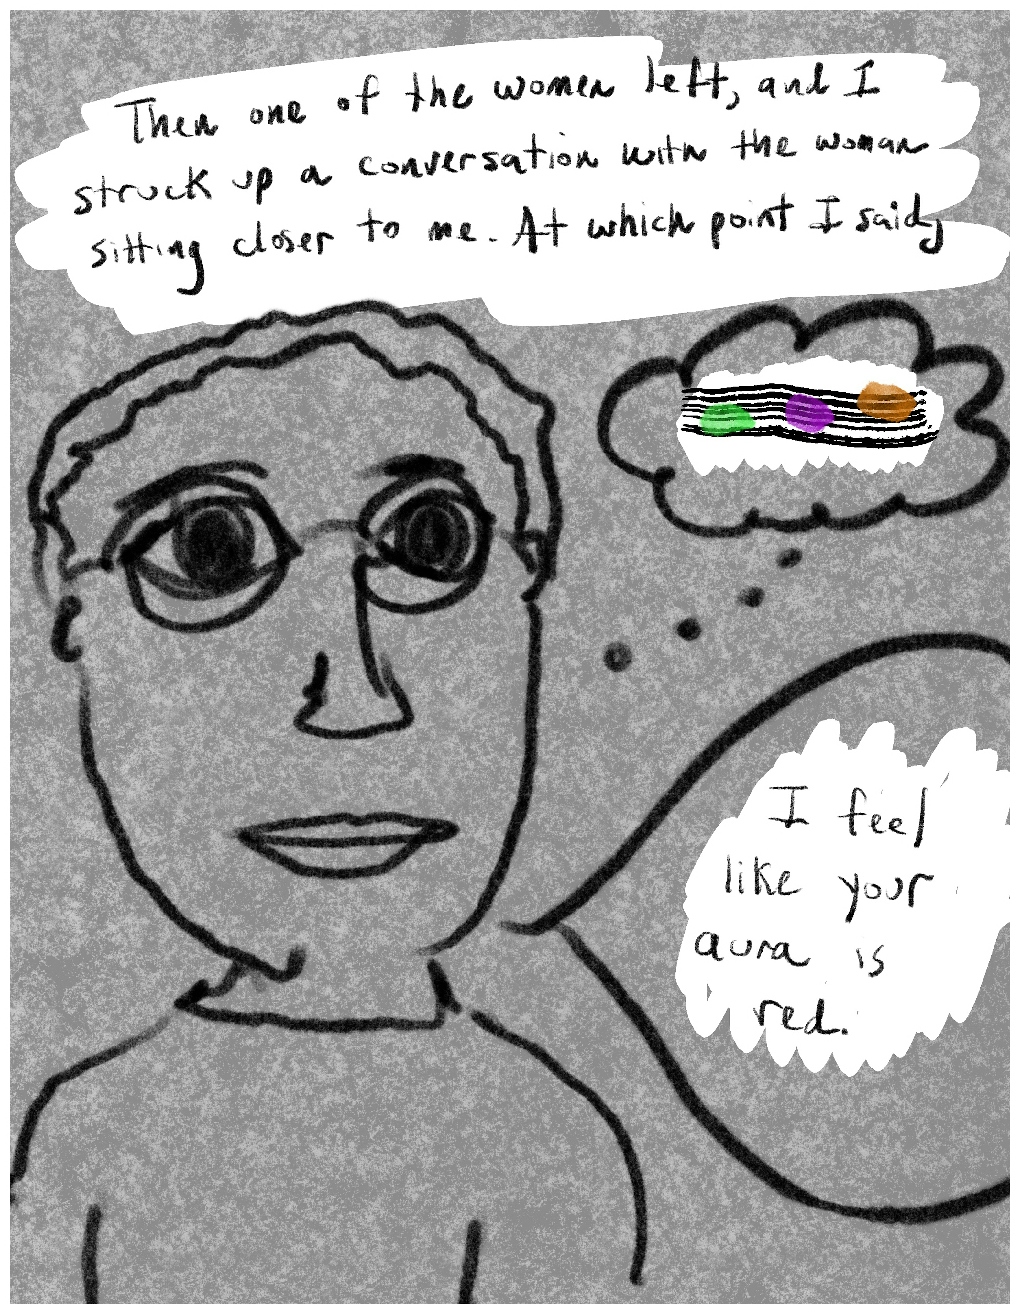 Panel 2 of a four-panel comic called My delusion wasn't shared'', consisting of thick black line drawing on a mottled grey background. A young man with short hair, glasses and large round black eyes stares out at the viewer. A block of text above him says "Then one of the women left, and I struck up a conversation with the woman sittng closer to me. At which point I said,". A thought bubble comes from the figure containing narrow horizontal lines like a musical stave. Across the 'stave' are three daubs of colour (green, purple and orange) ascending like musical notes across the 'stave'. Below the thought bubble is a speech bubble coming from the figure's mouth, which says "I feeel like your aura is red".